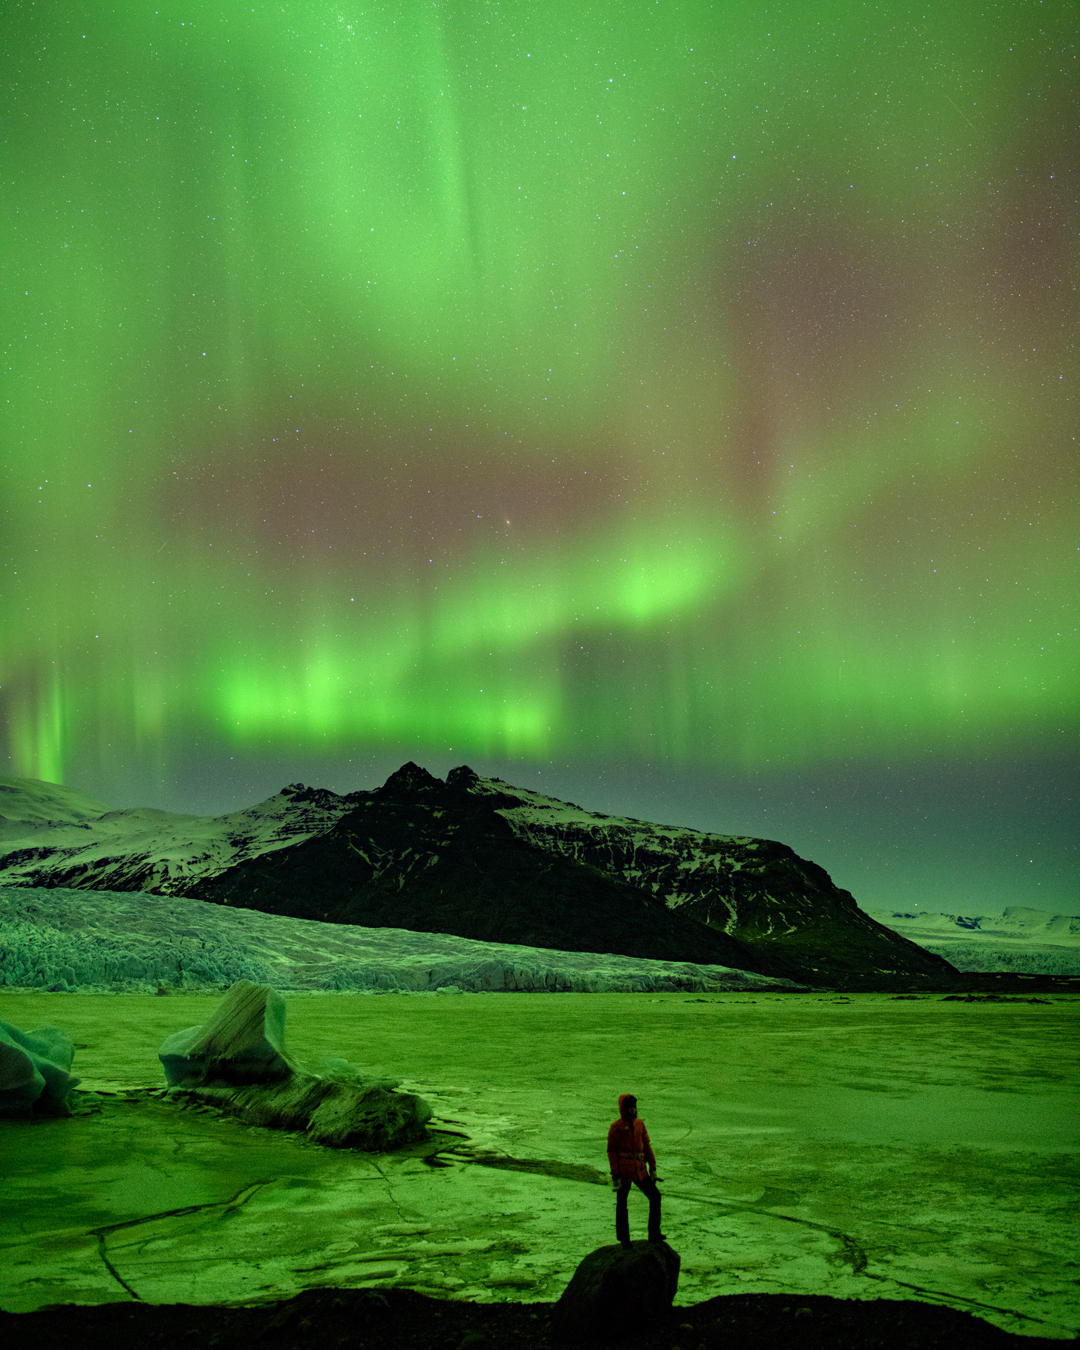 “This was taken a few nights ago in southeast Iceland facing a massive glacier lit by the northern lights.”